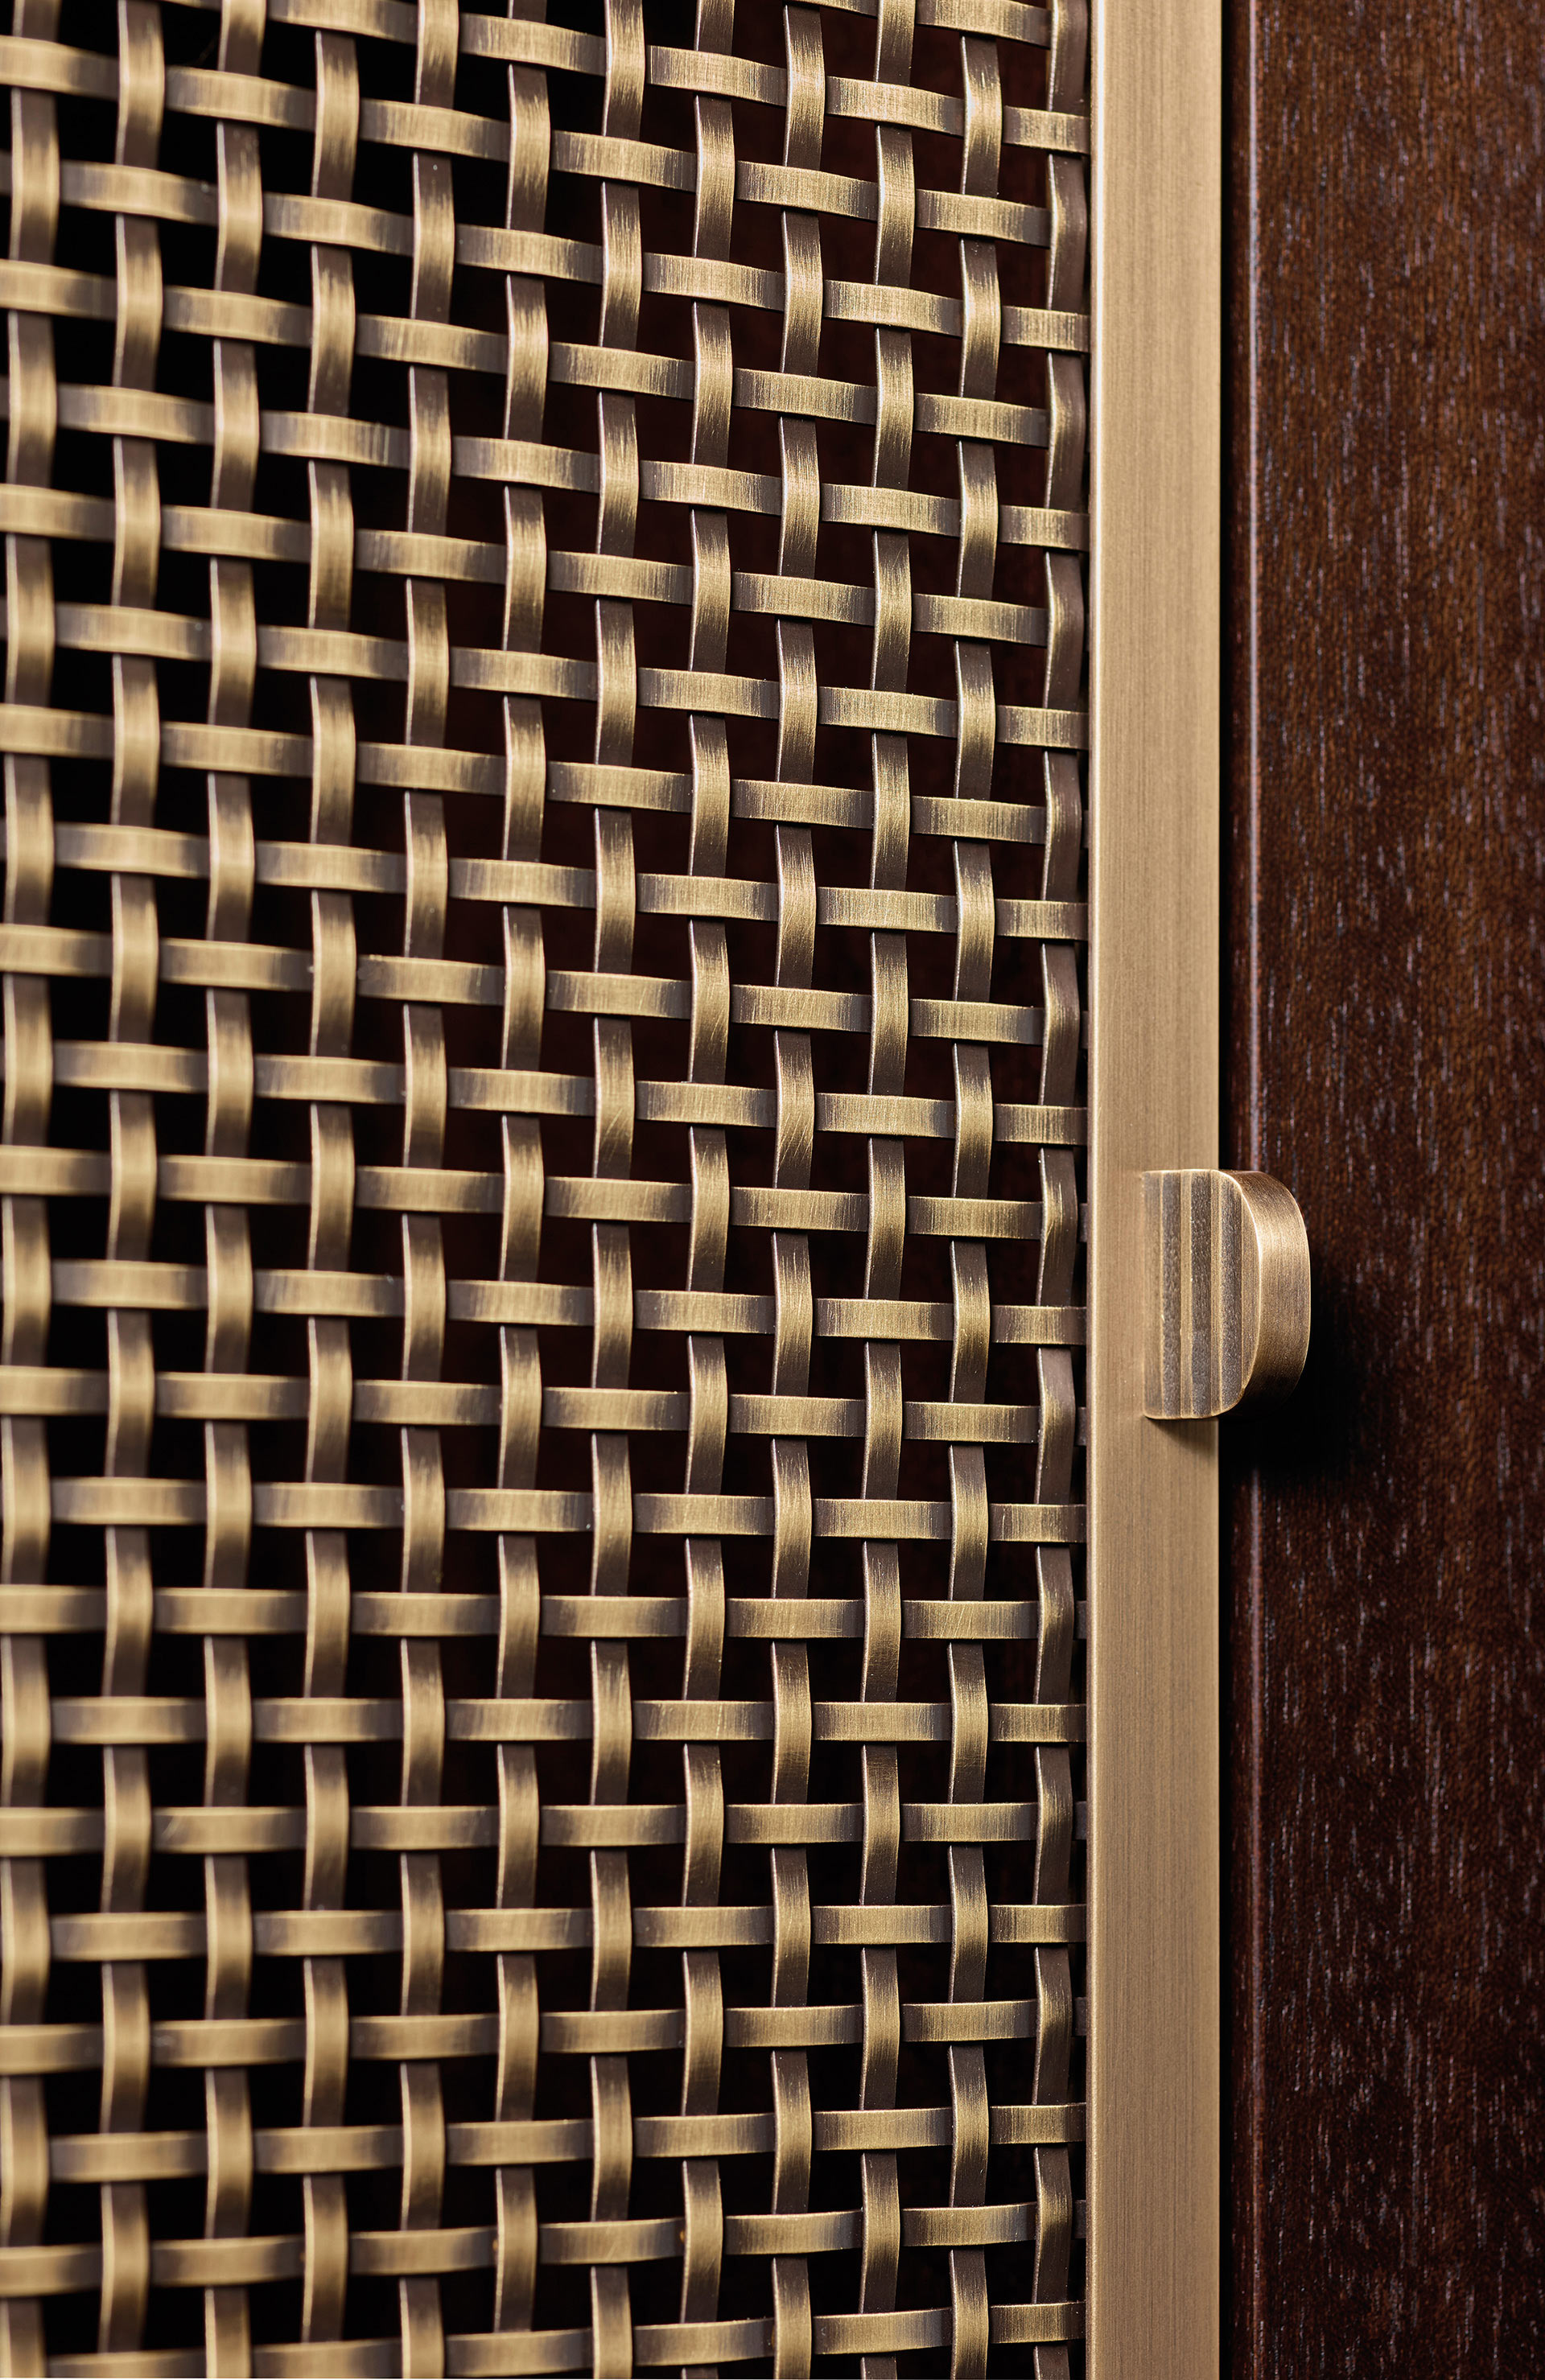 Detail of the bronze handle of Nightwood, a wooden modular bookcase with bronze details, from Promemoria's Night Tales collection | Promemoria